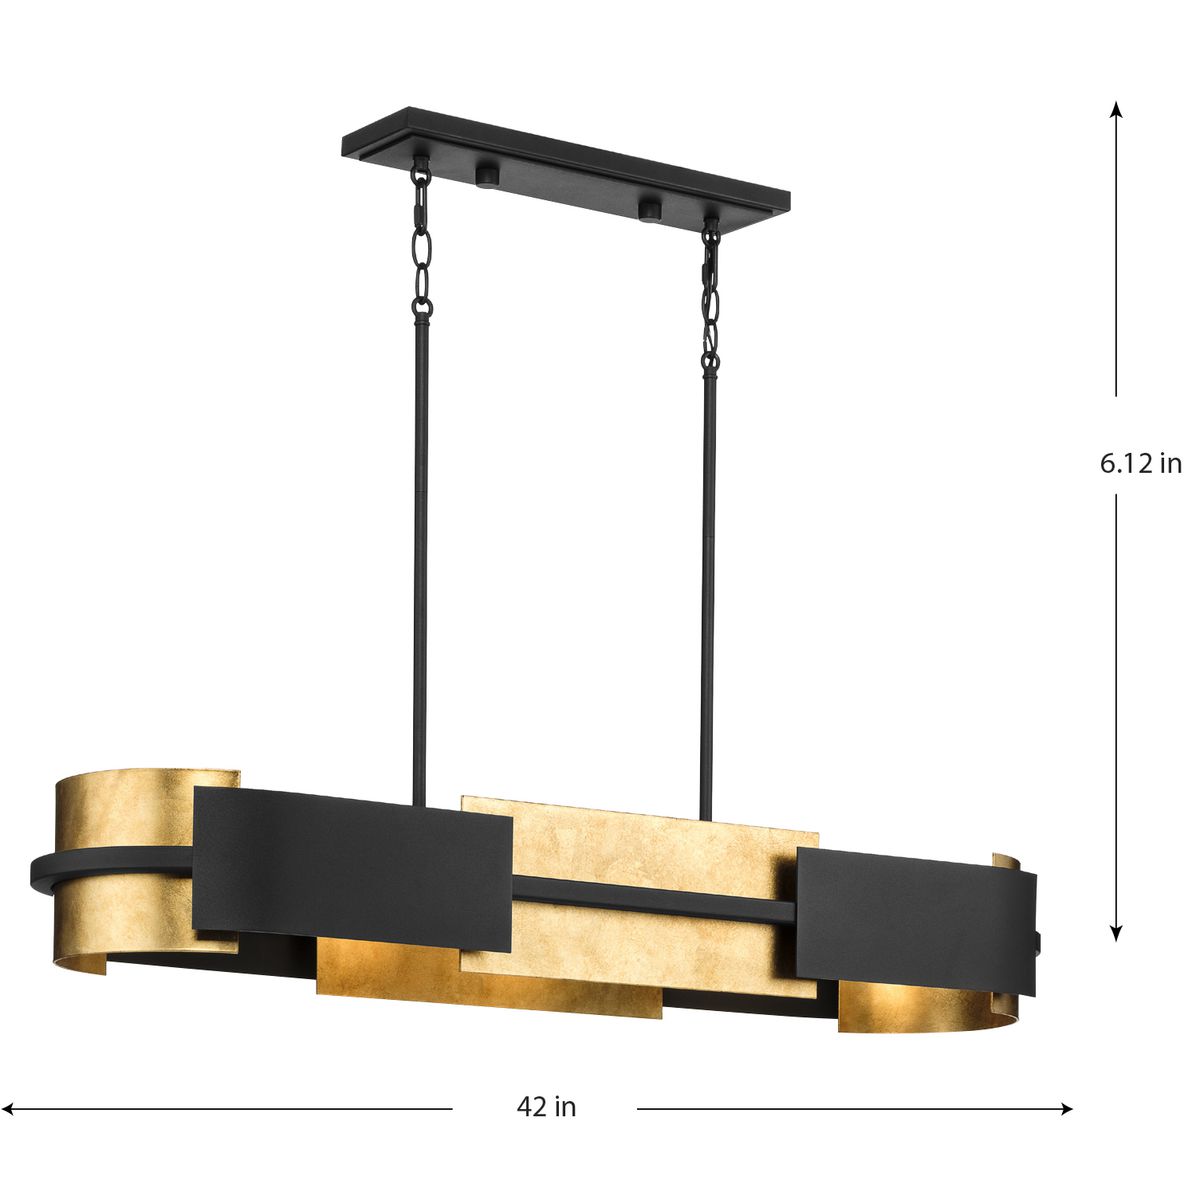 Lowery Collection Four-Light Textured Black Industrial Luxe Linear  Chandelier with Distressed Gold Leaf Accent, P400352-031